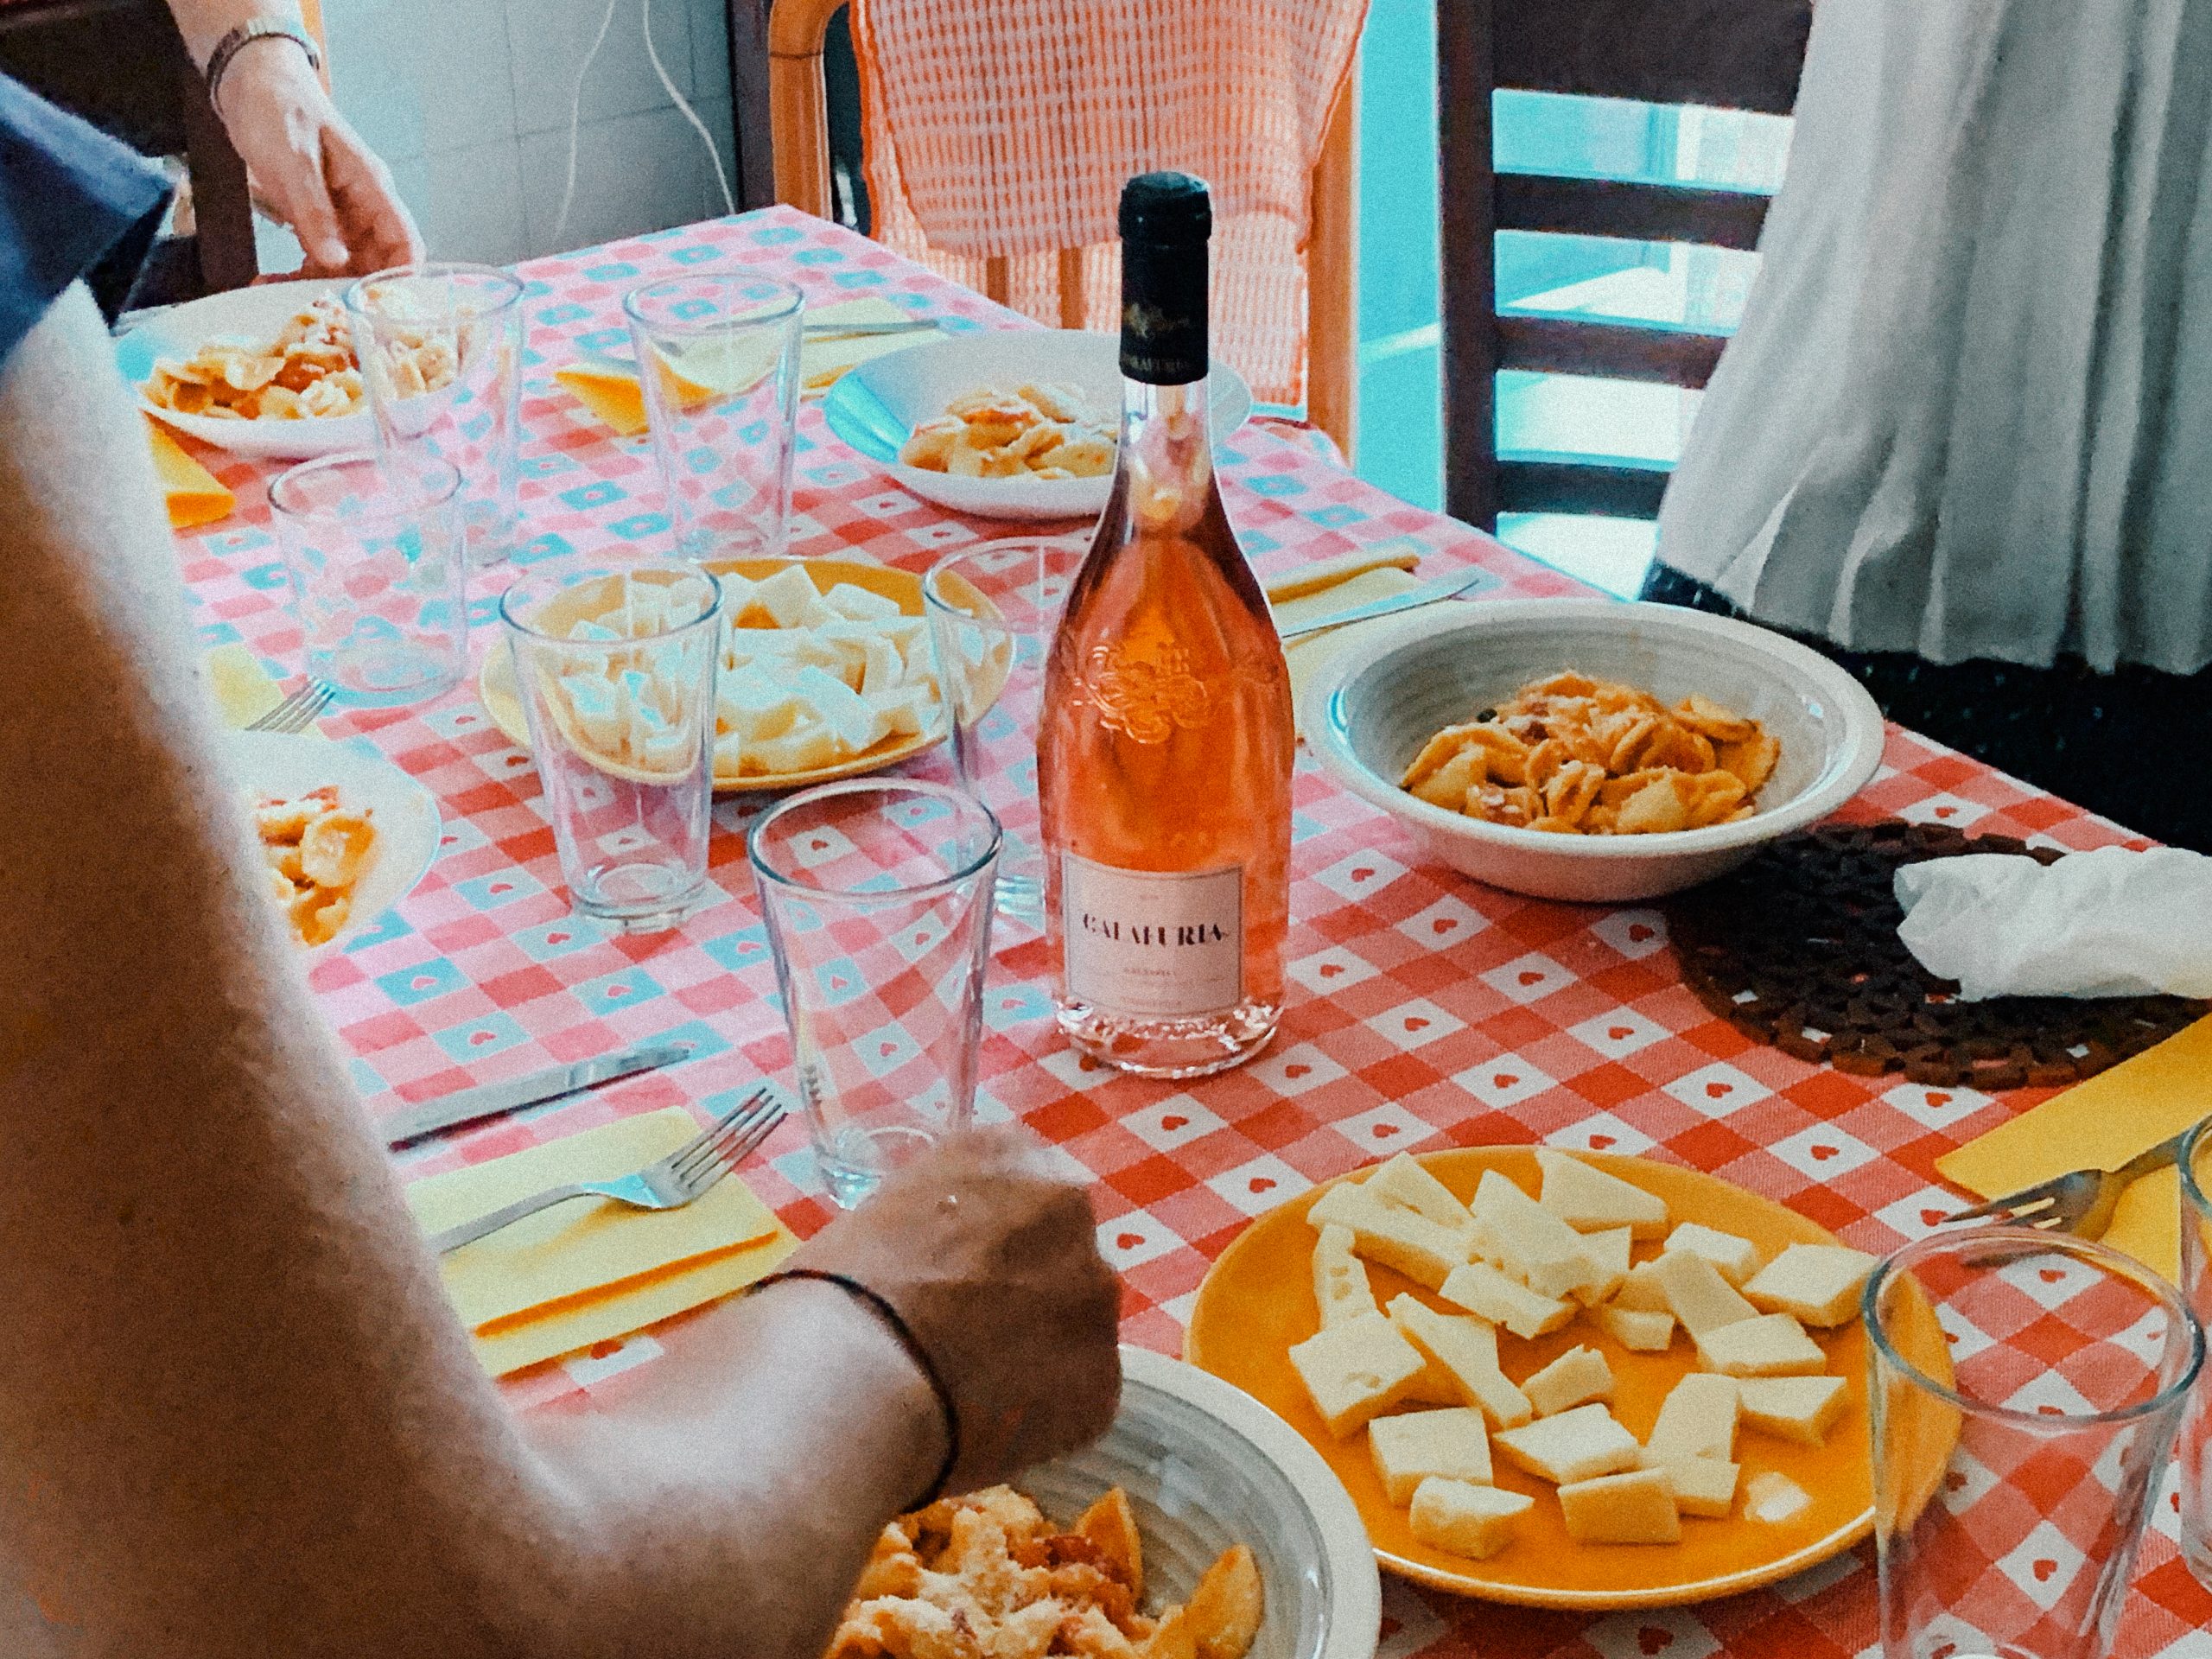 In the middle of a table with snacks laid out, a bottle of Italian rosé Calafuria.